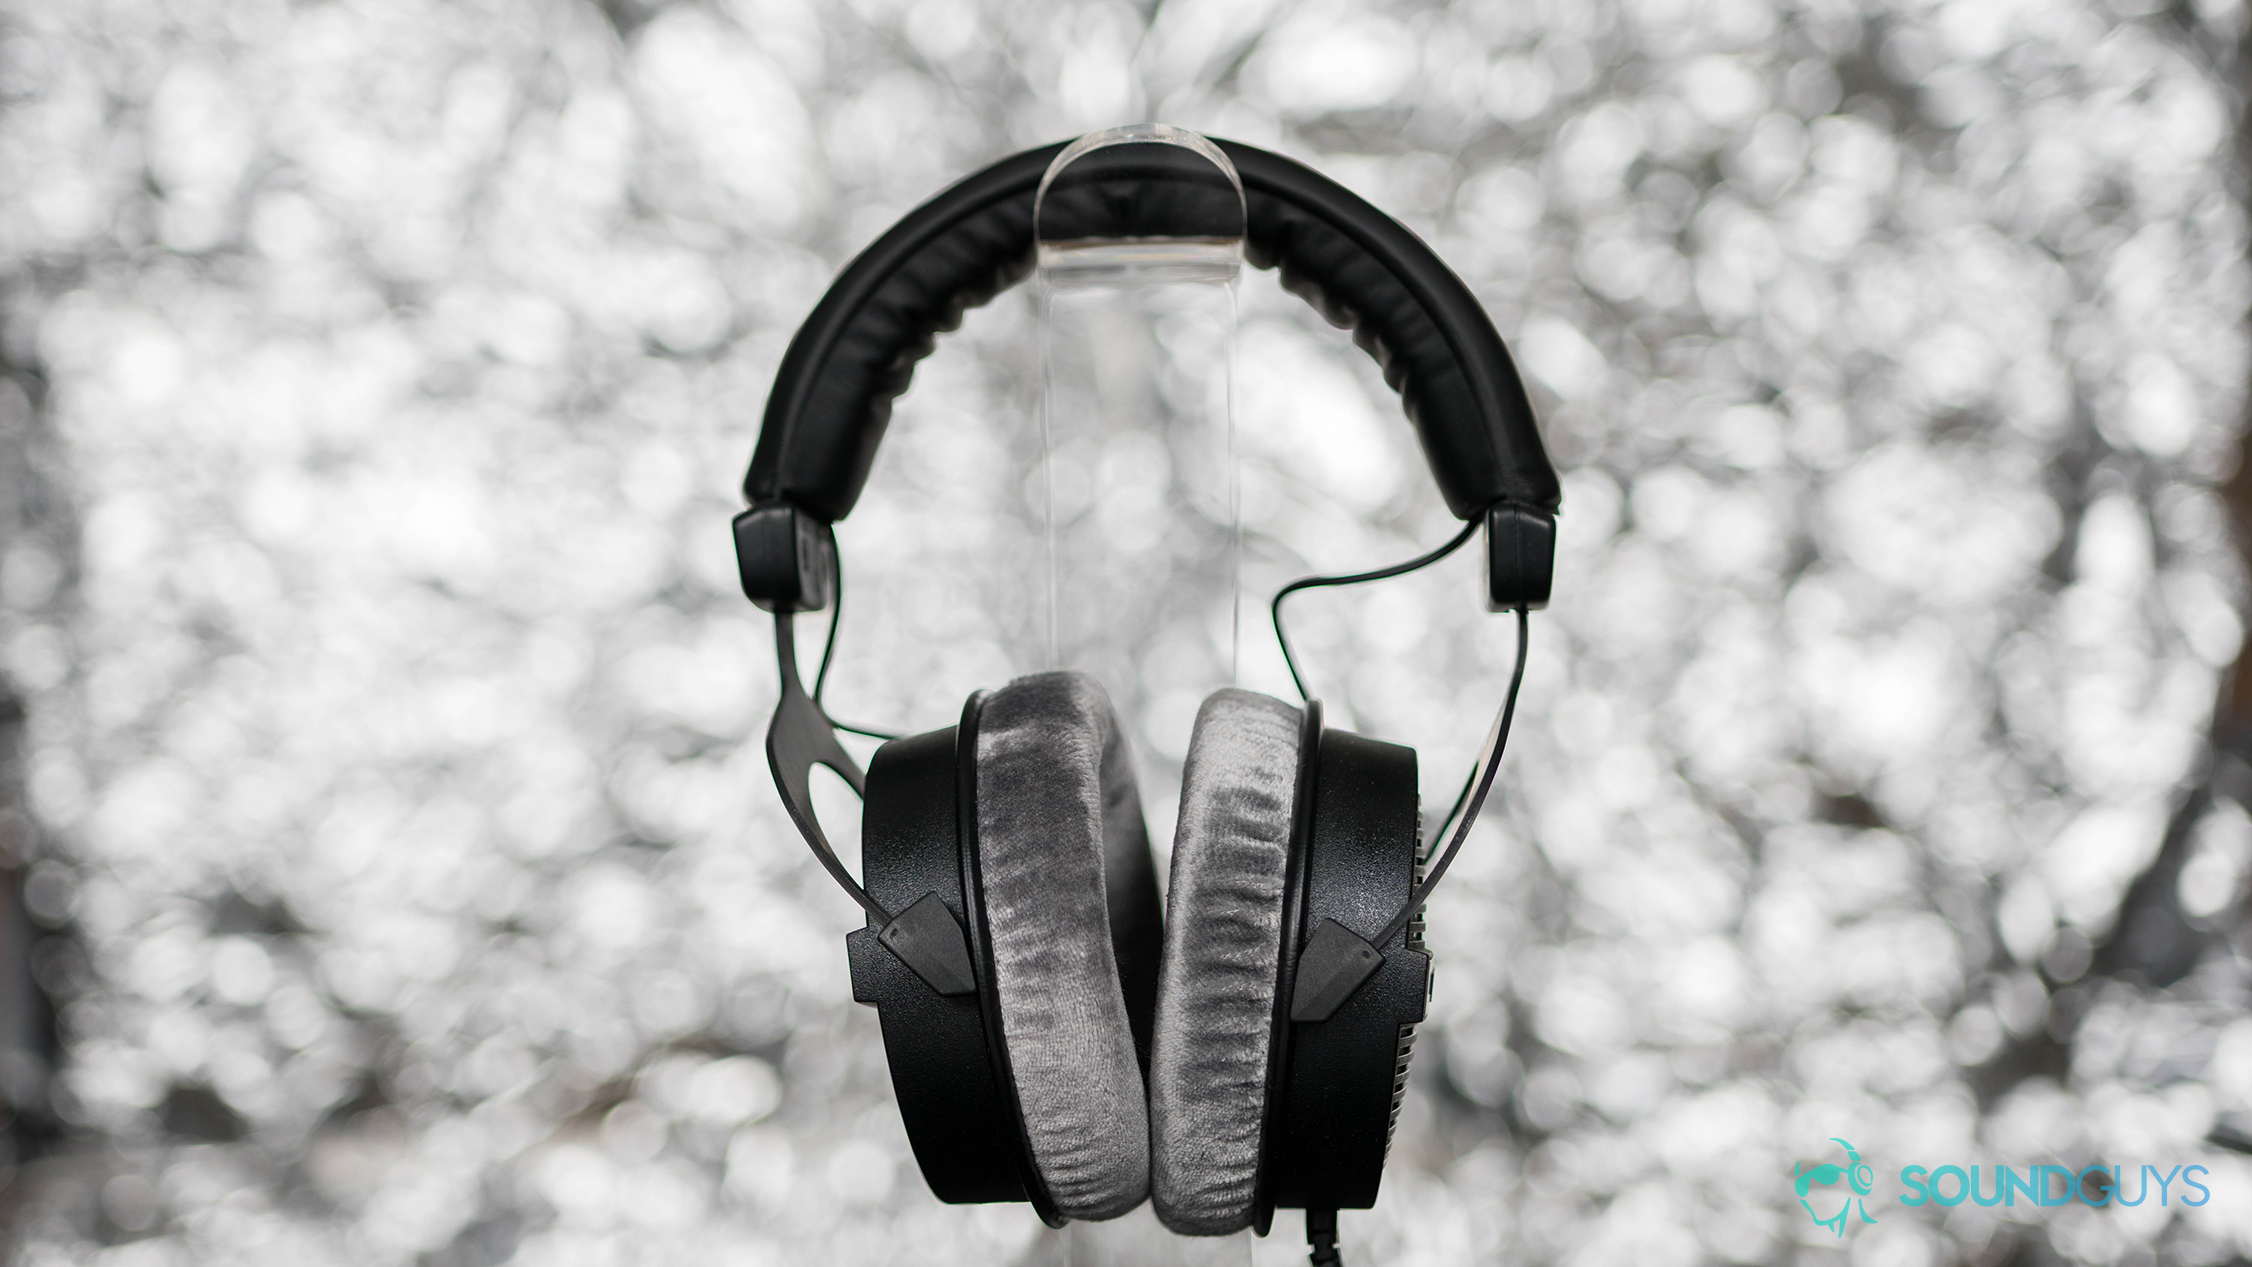 Best headphones under $200:A photo of the Beyerdynamic DT 990 PRO on a headphone stand